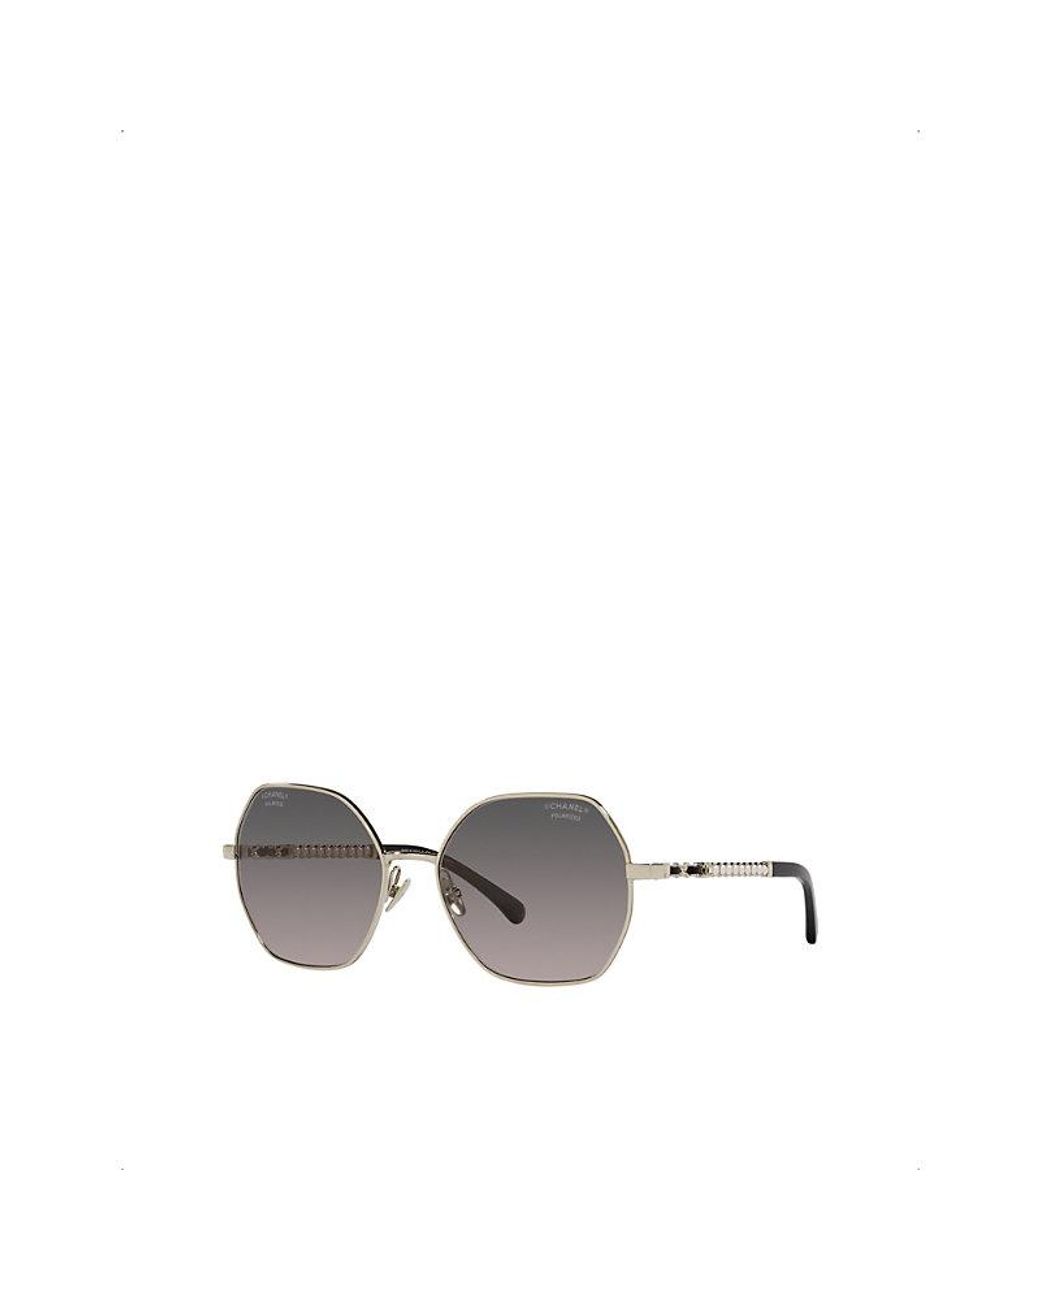 Chanel Round Frame Sunglasses in Blue